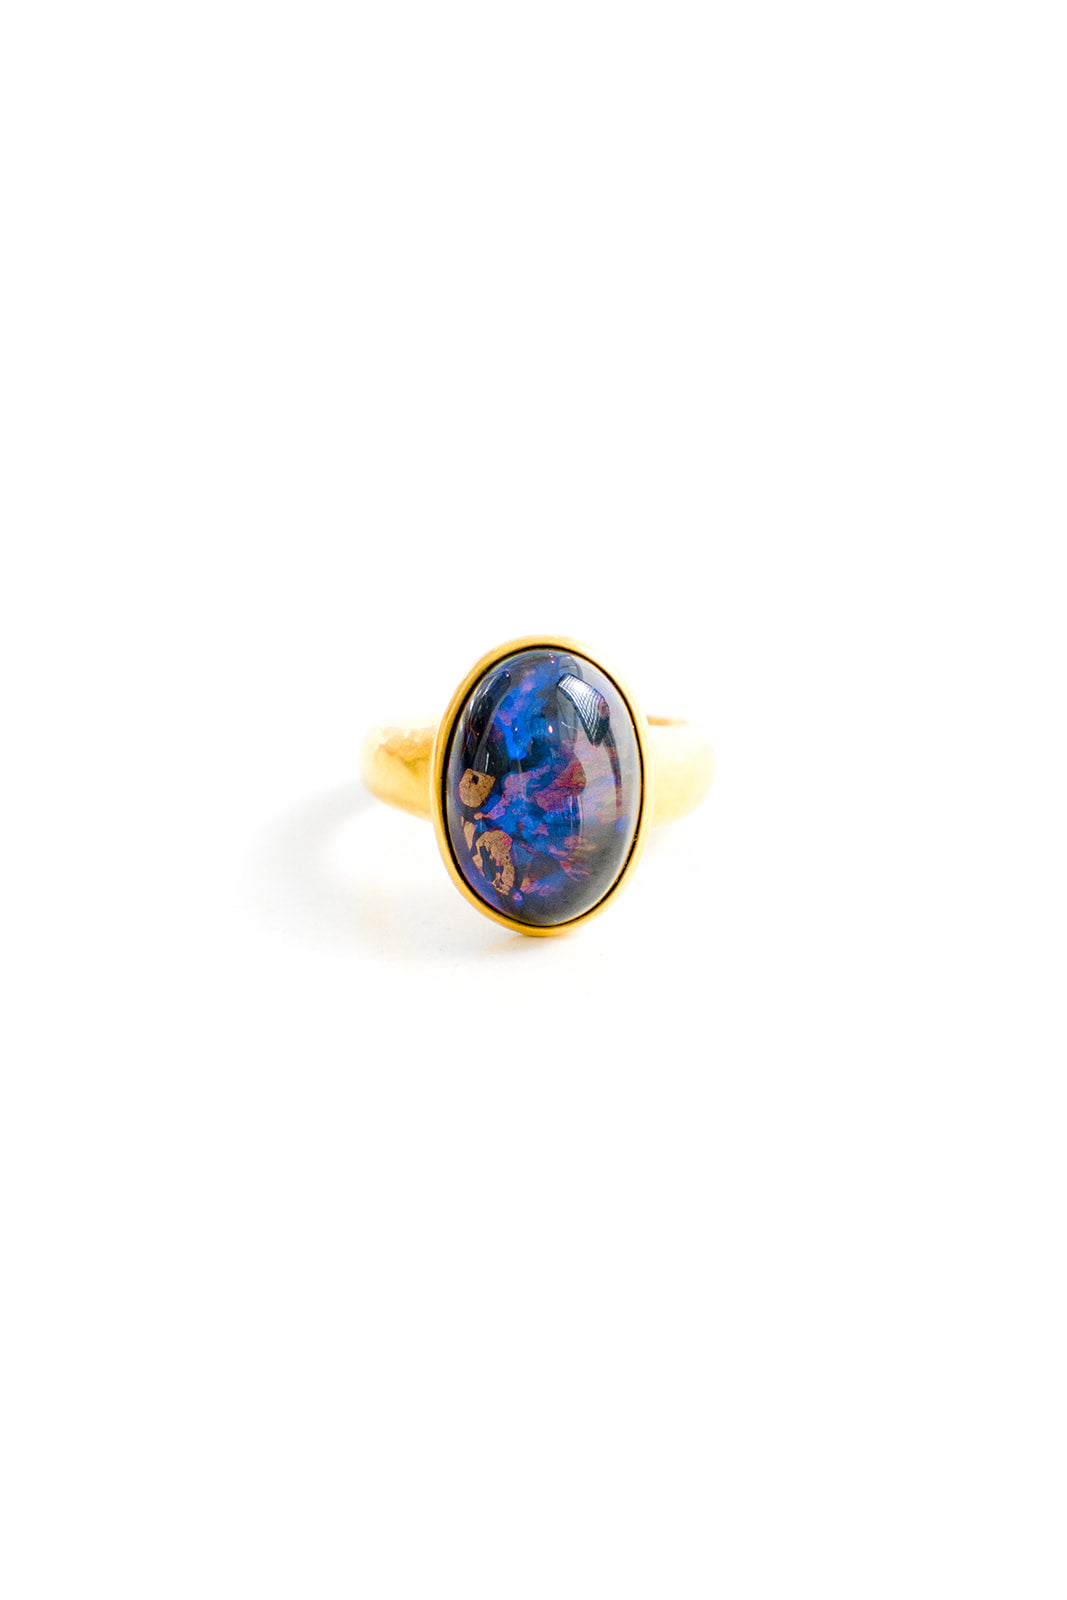 22K Yellow Gold Large Oval Boulder Opal Flash Ring